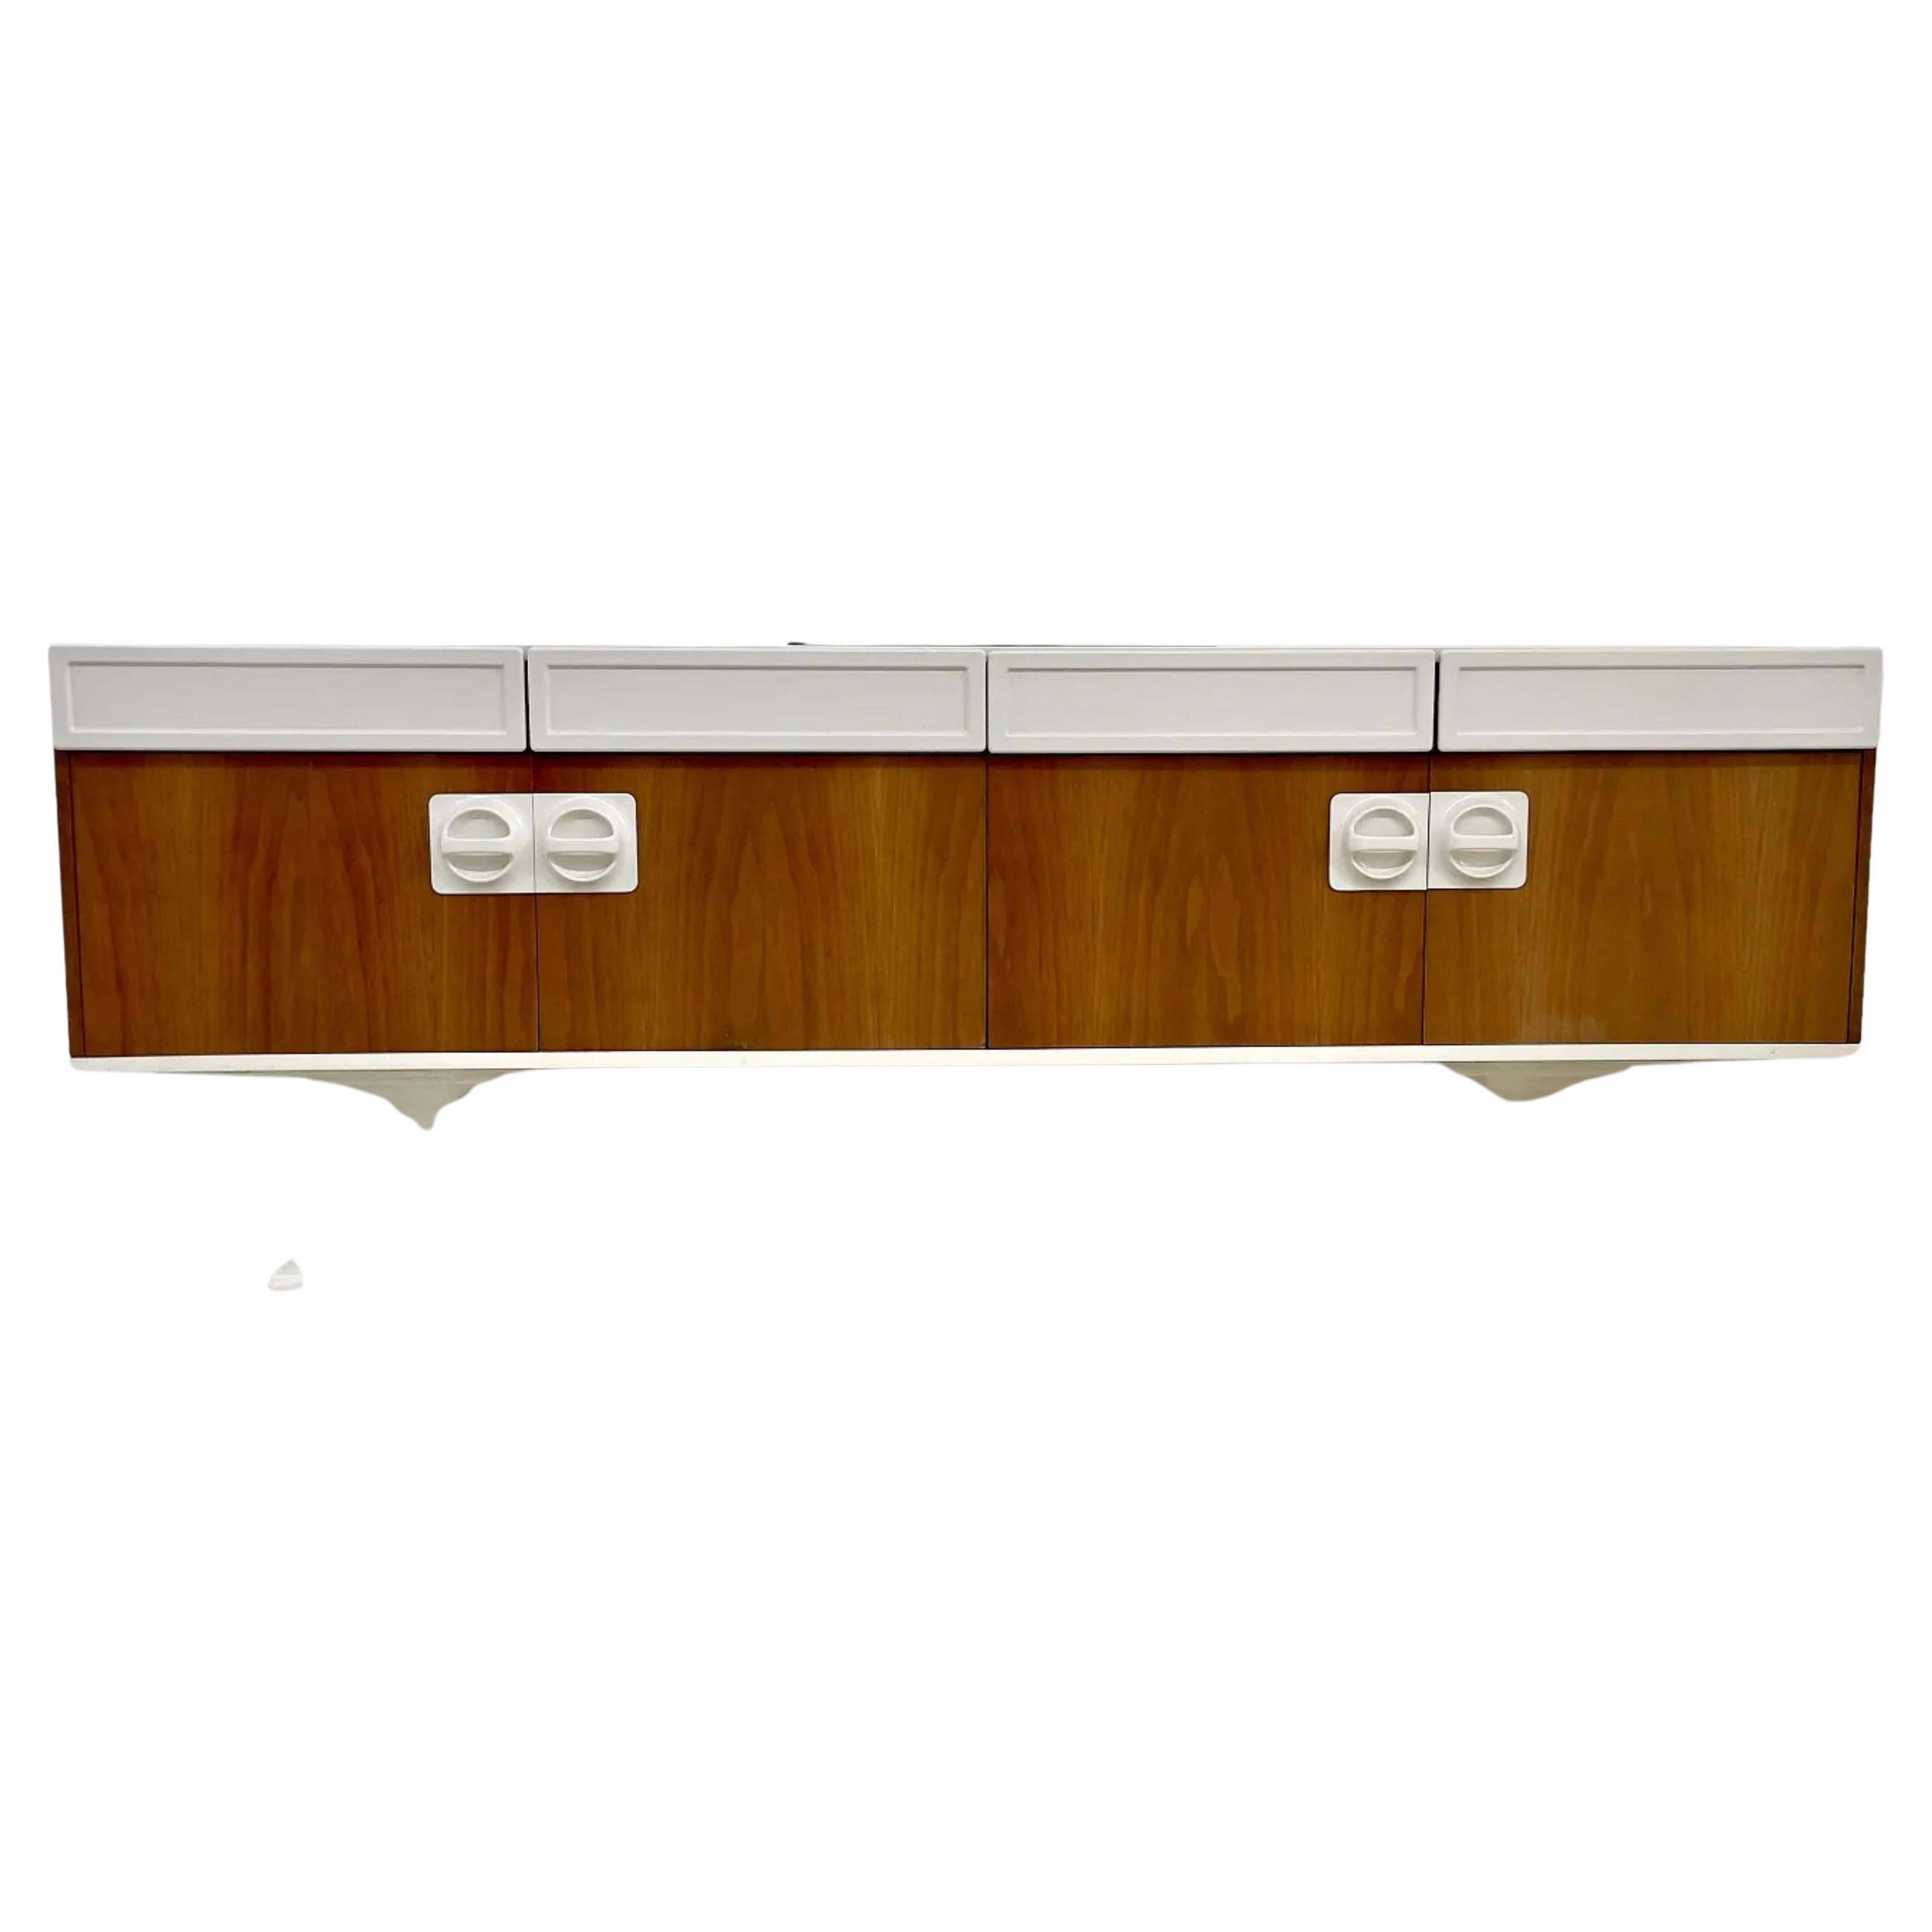 Luigi Sormani Space Age sideboard in white lacquered wood, Wallnut wood and acrylic for SORMANI production. 1970s.
Rare large dimensions for this model Width cm 226 Depth cm 44 Height cm 82 
Condition:
Good original vintage condition Patina of